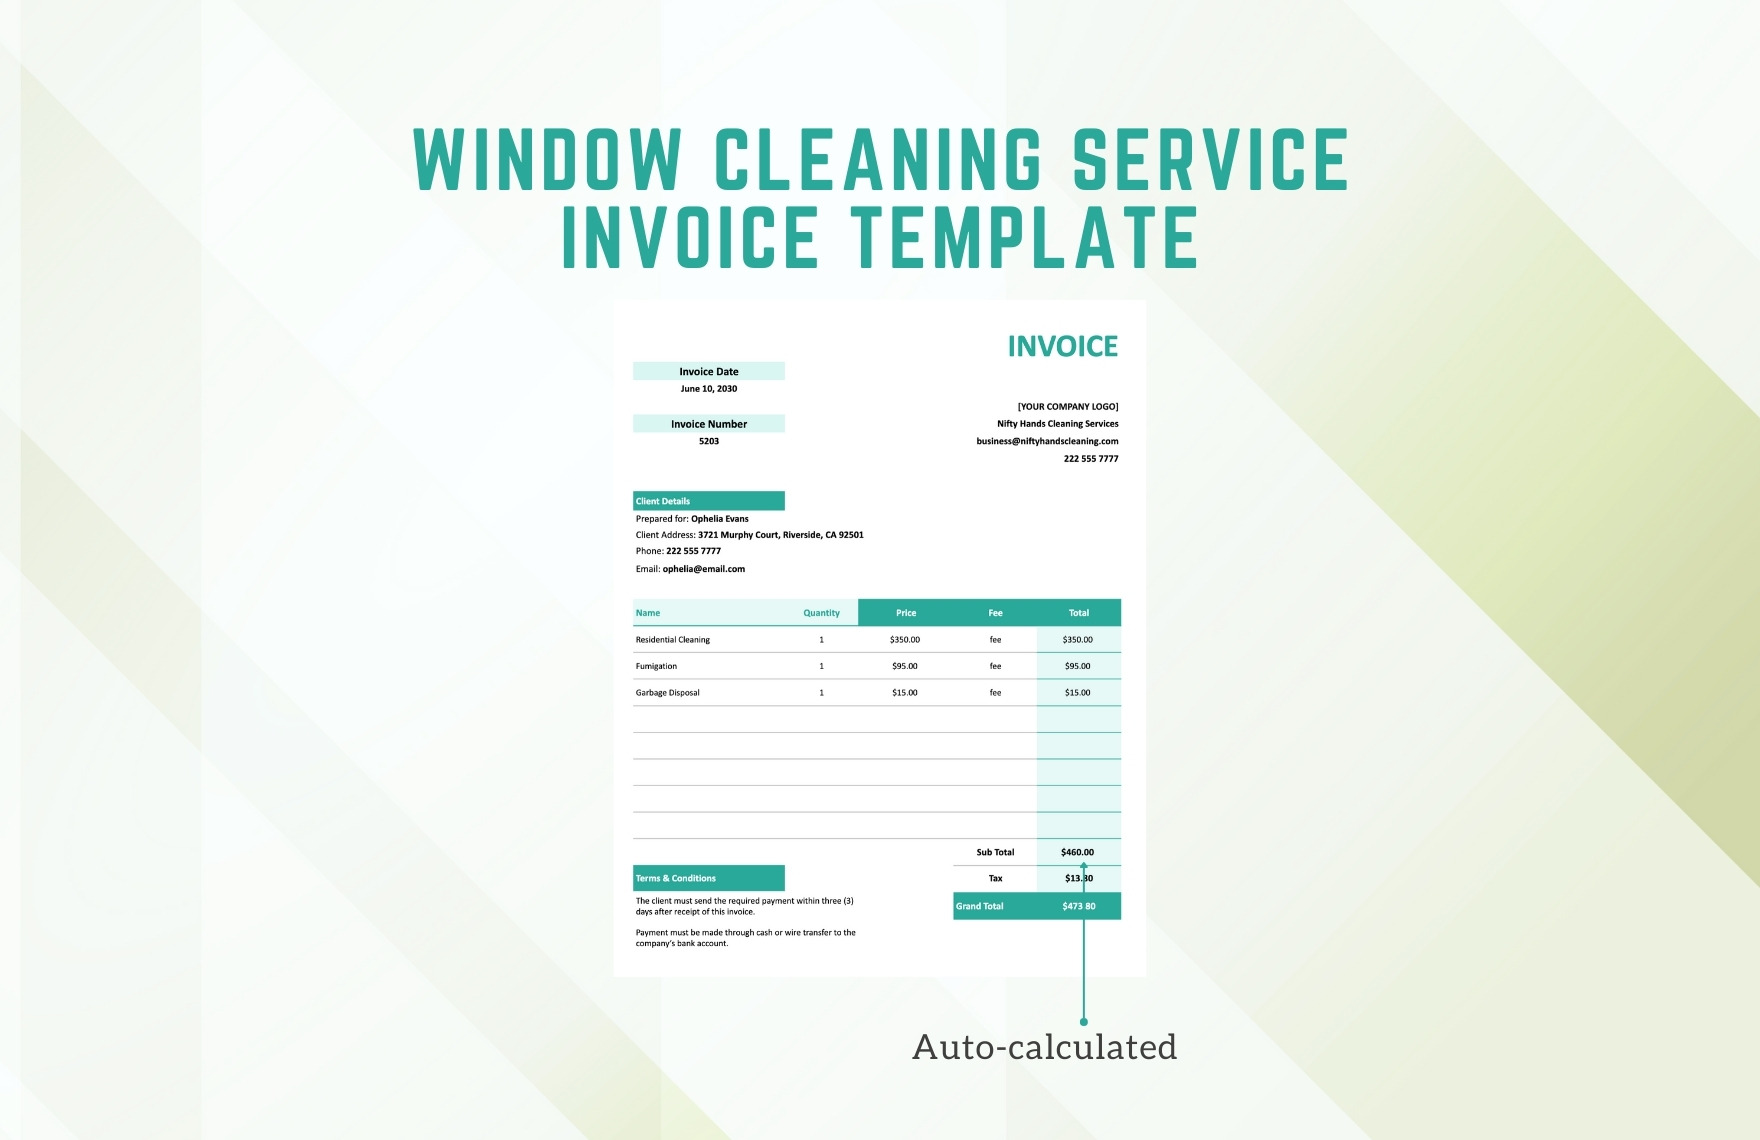 Window Cleaning Service Invoice Template